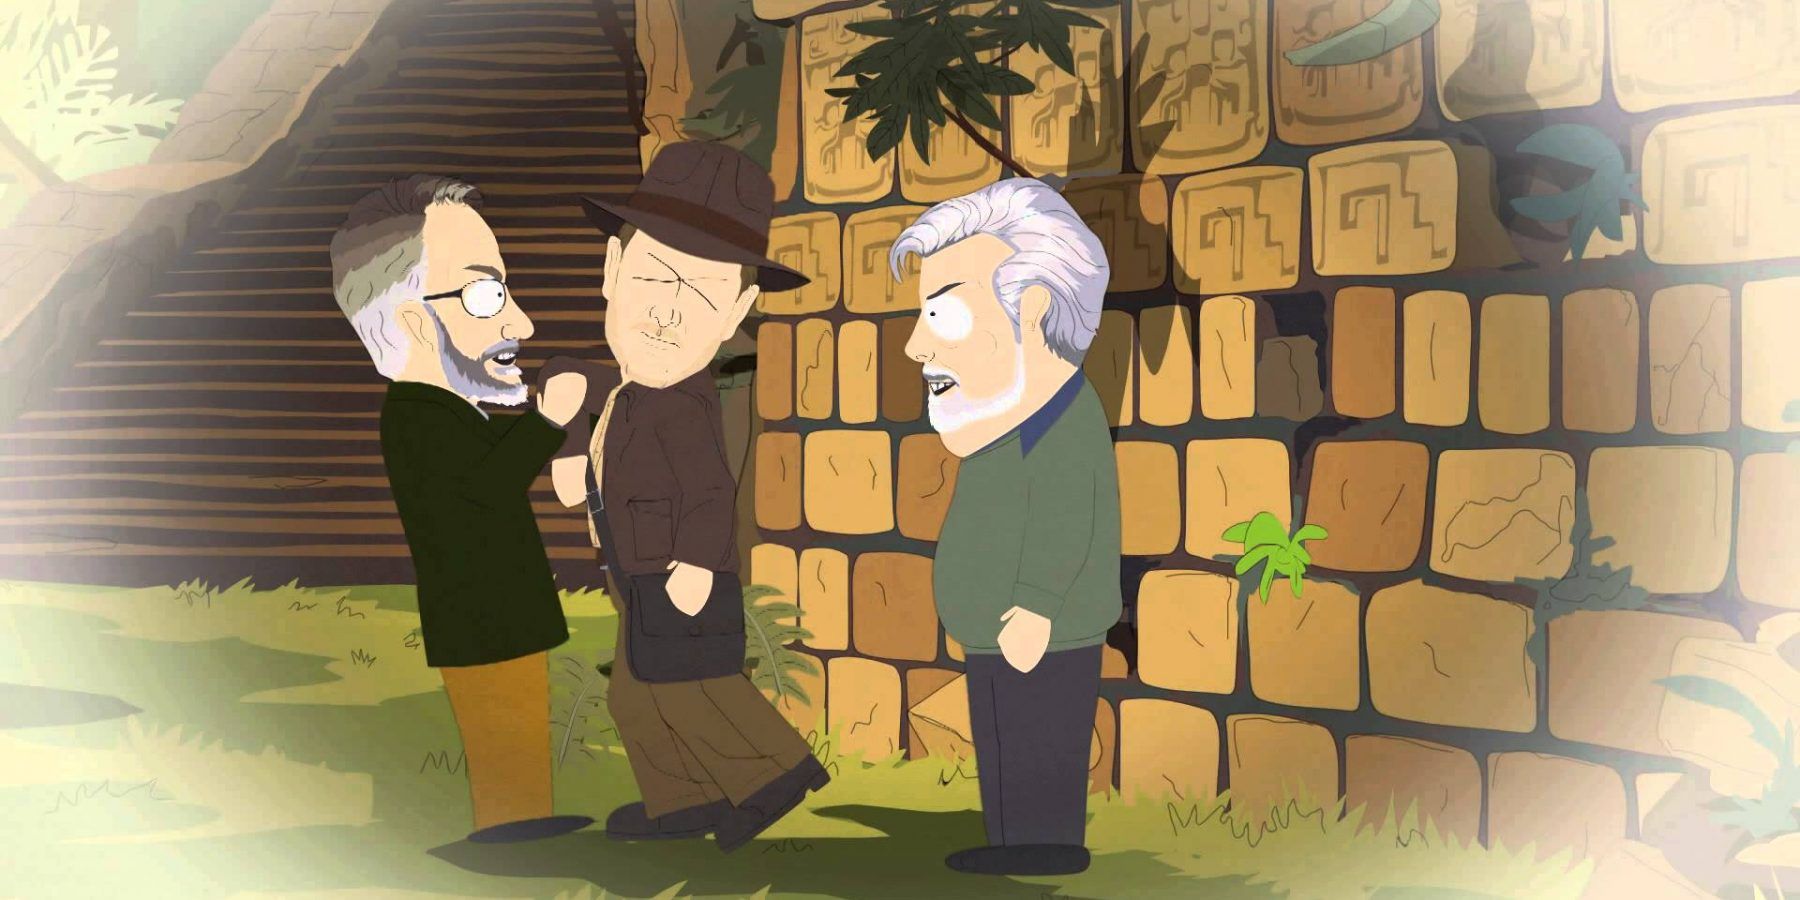 Steven Spielberg and George Lucas beat up George Lucas in South Park